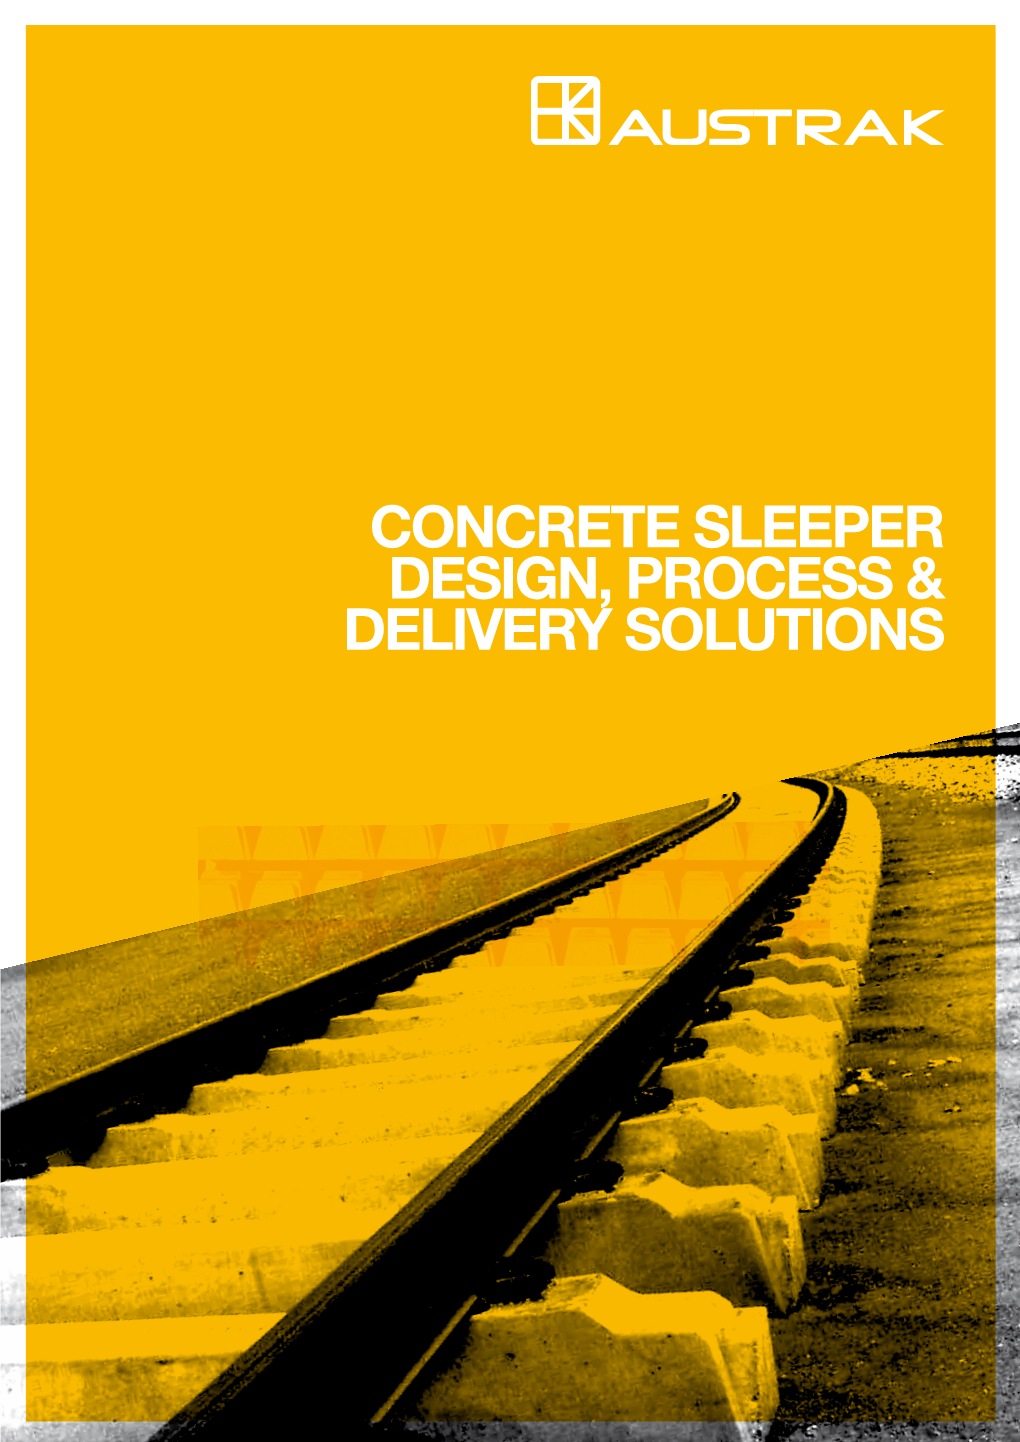 Concrete Sleeper Design, Process & Delivery Solutions